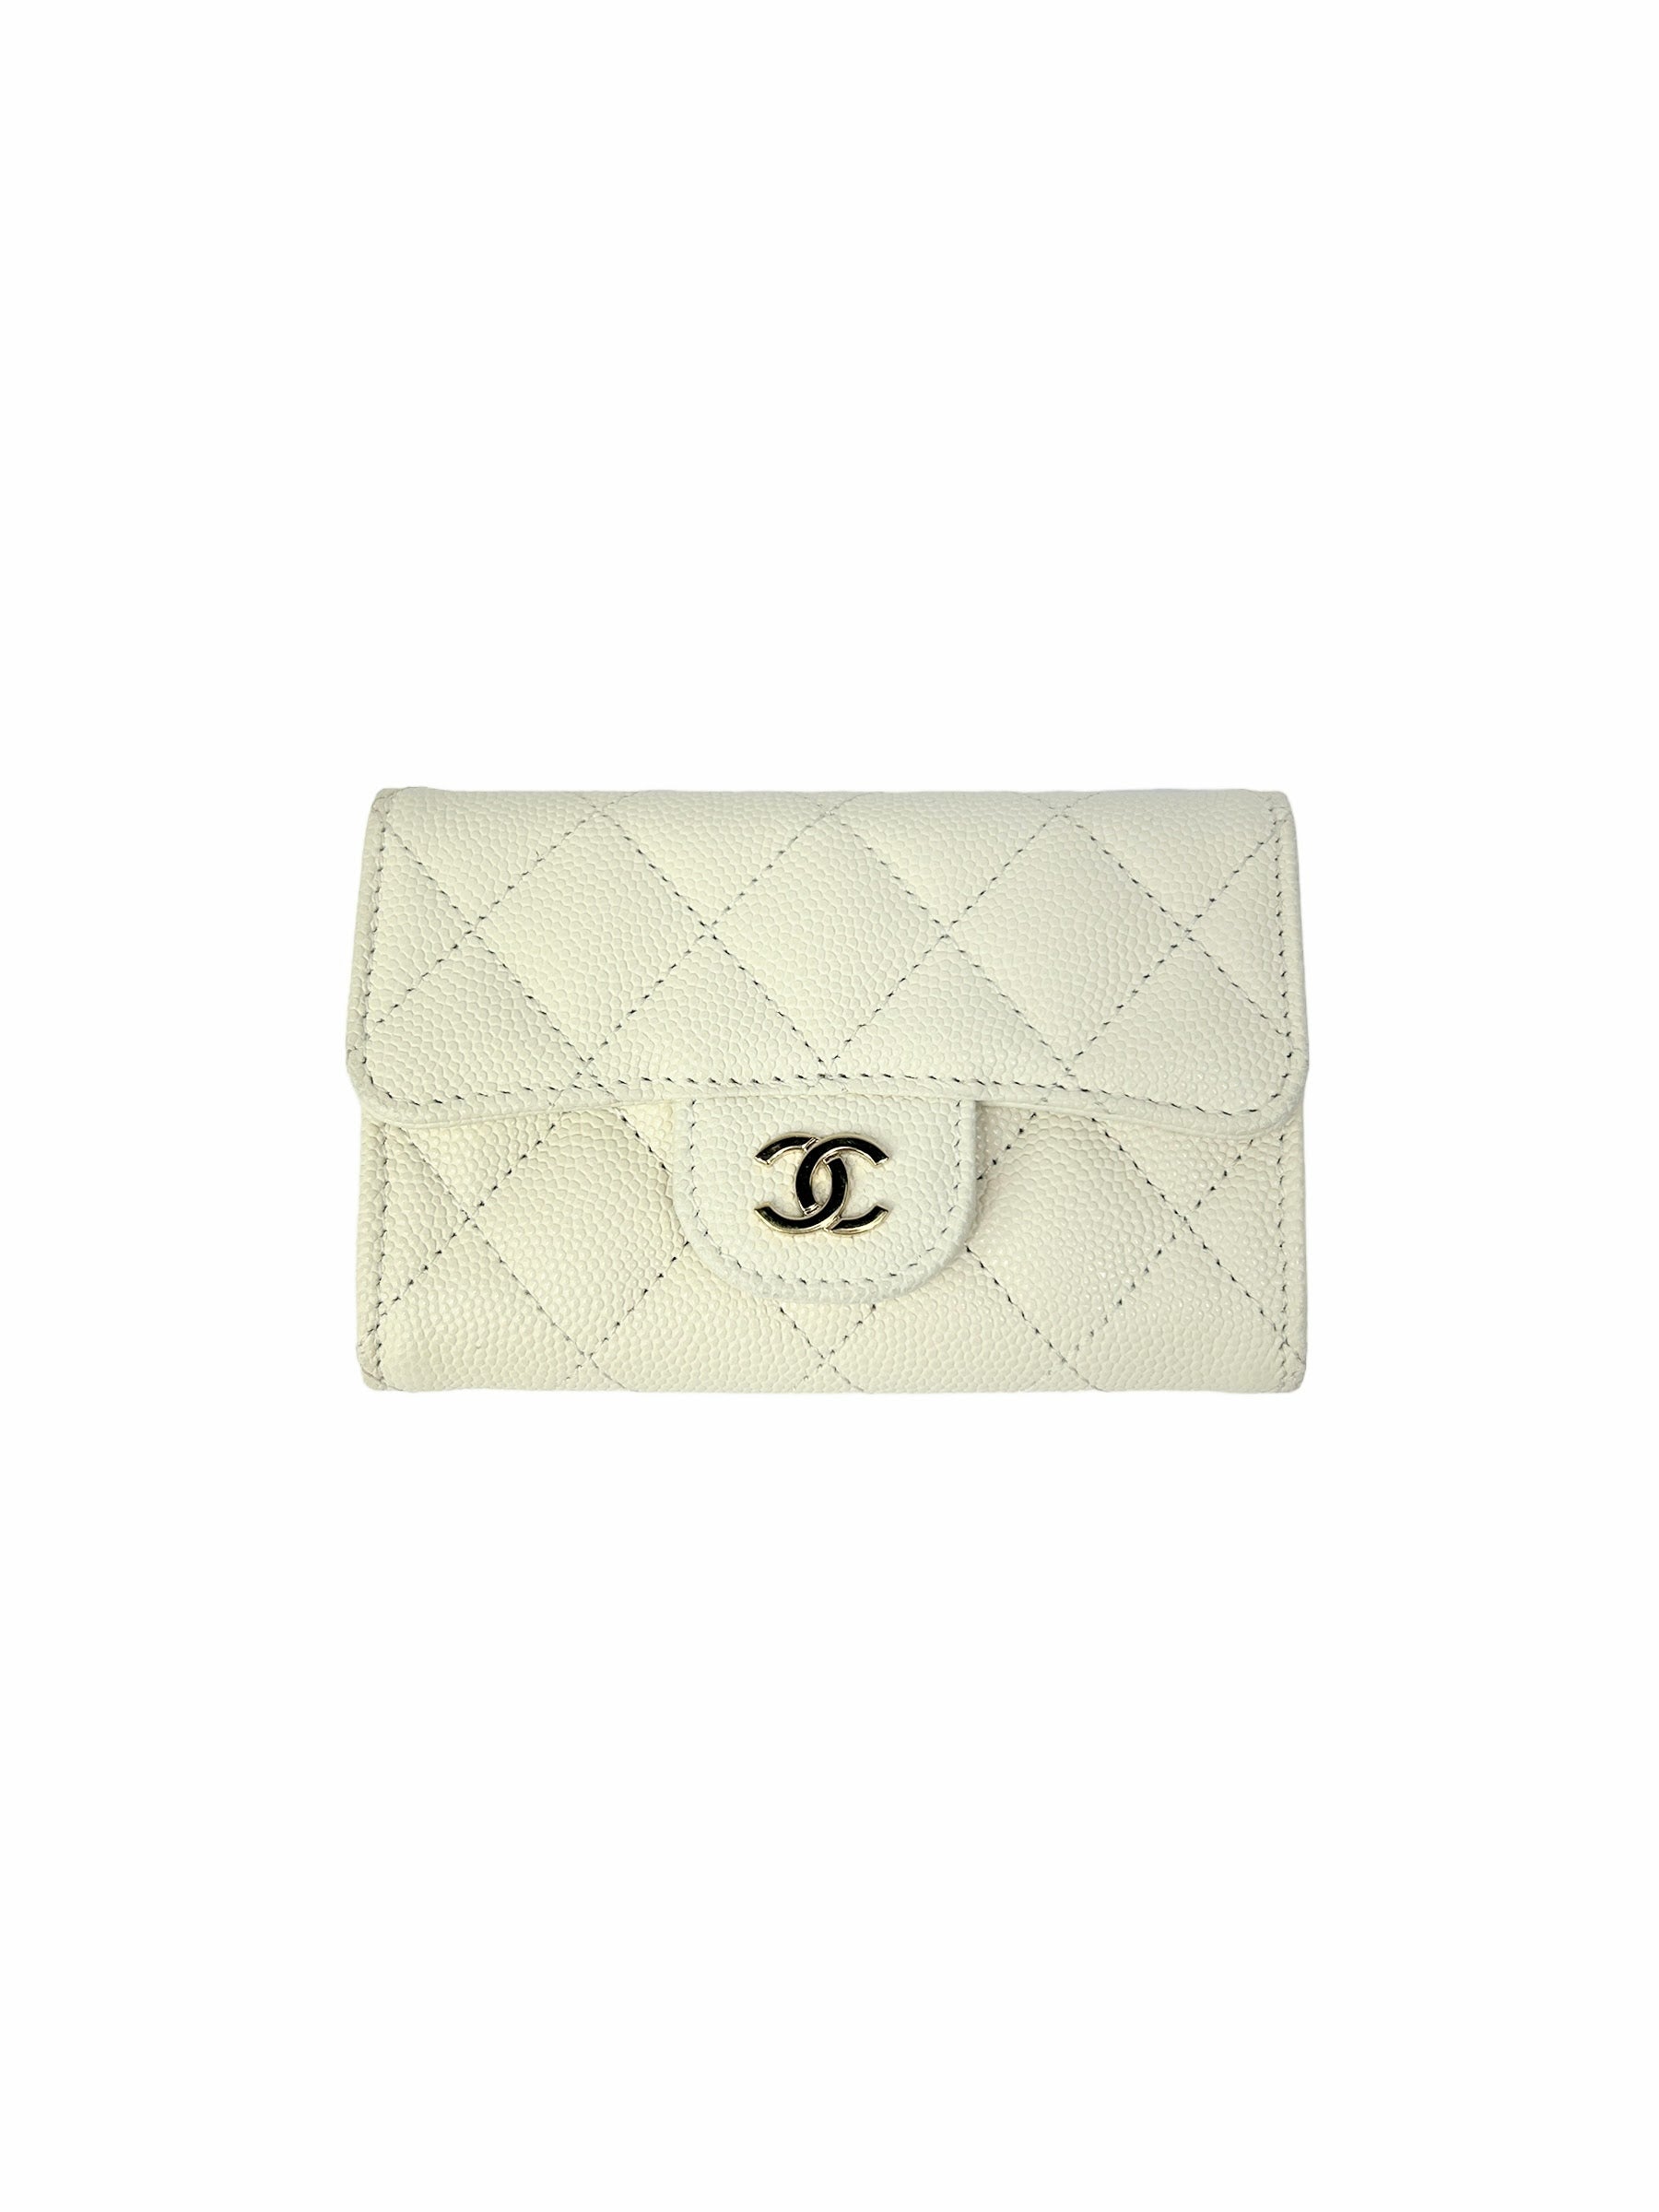 White Caviar Quilted Calfskin Leather Card Holder Wallet W/LGHW